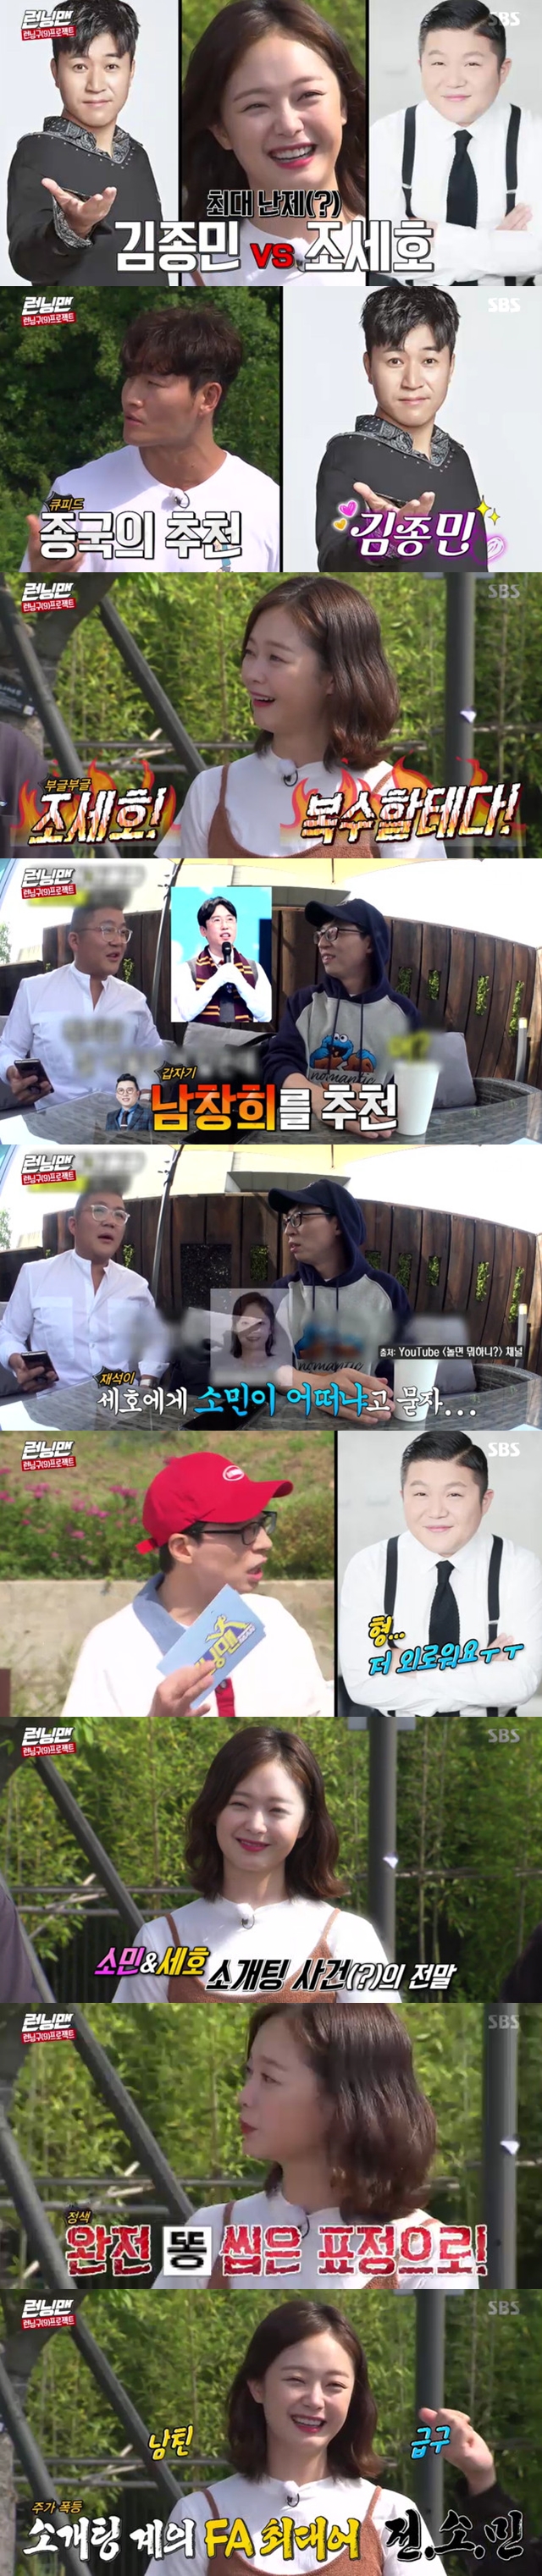 Yoo Jae-Suk apologized to Jeon So-min.Yoo Jae-Suk mentioned the case of Jo Se-ho, a former member of the SBS Running Man broadcast on June 23.On this day, Yoo Jae-Suk mentioned that there was a recent sorry thing for Jeon So-min.Yoo Jae-Suk recalled, I did not mean to arrange a introduction, but I talked to Jo Se-ho on YouTube recently, and Jo Se-ho is lonely. So I did not ask for a doctor and I talked about my boyfriend without a boyfriend.At that time, Jo Se-ho expressed his disapproval and said, Then Nam Chang-hee.So, Jeon So-min said, If you are a broadcaster, you can talk nicely, but you talk with a full-faced look. I came out of the FA.Kim Jong-guk said, Kim Jong-min likes it and Somin hates it. Jeon So-min explained, I love it so much. So Yoo Jae-Suk said, Why do you tie Jeon So-min to the entertainment side?bak-beauty